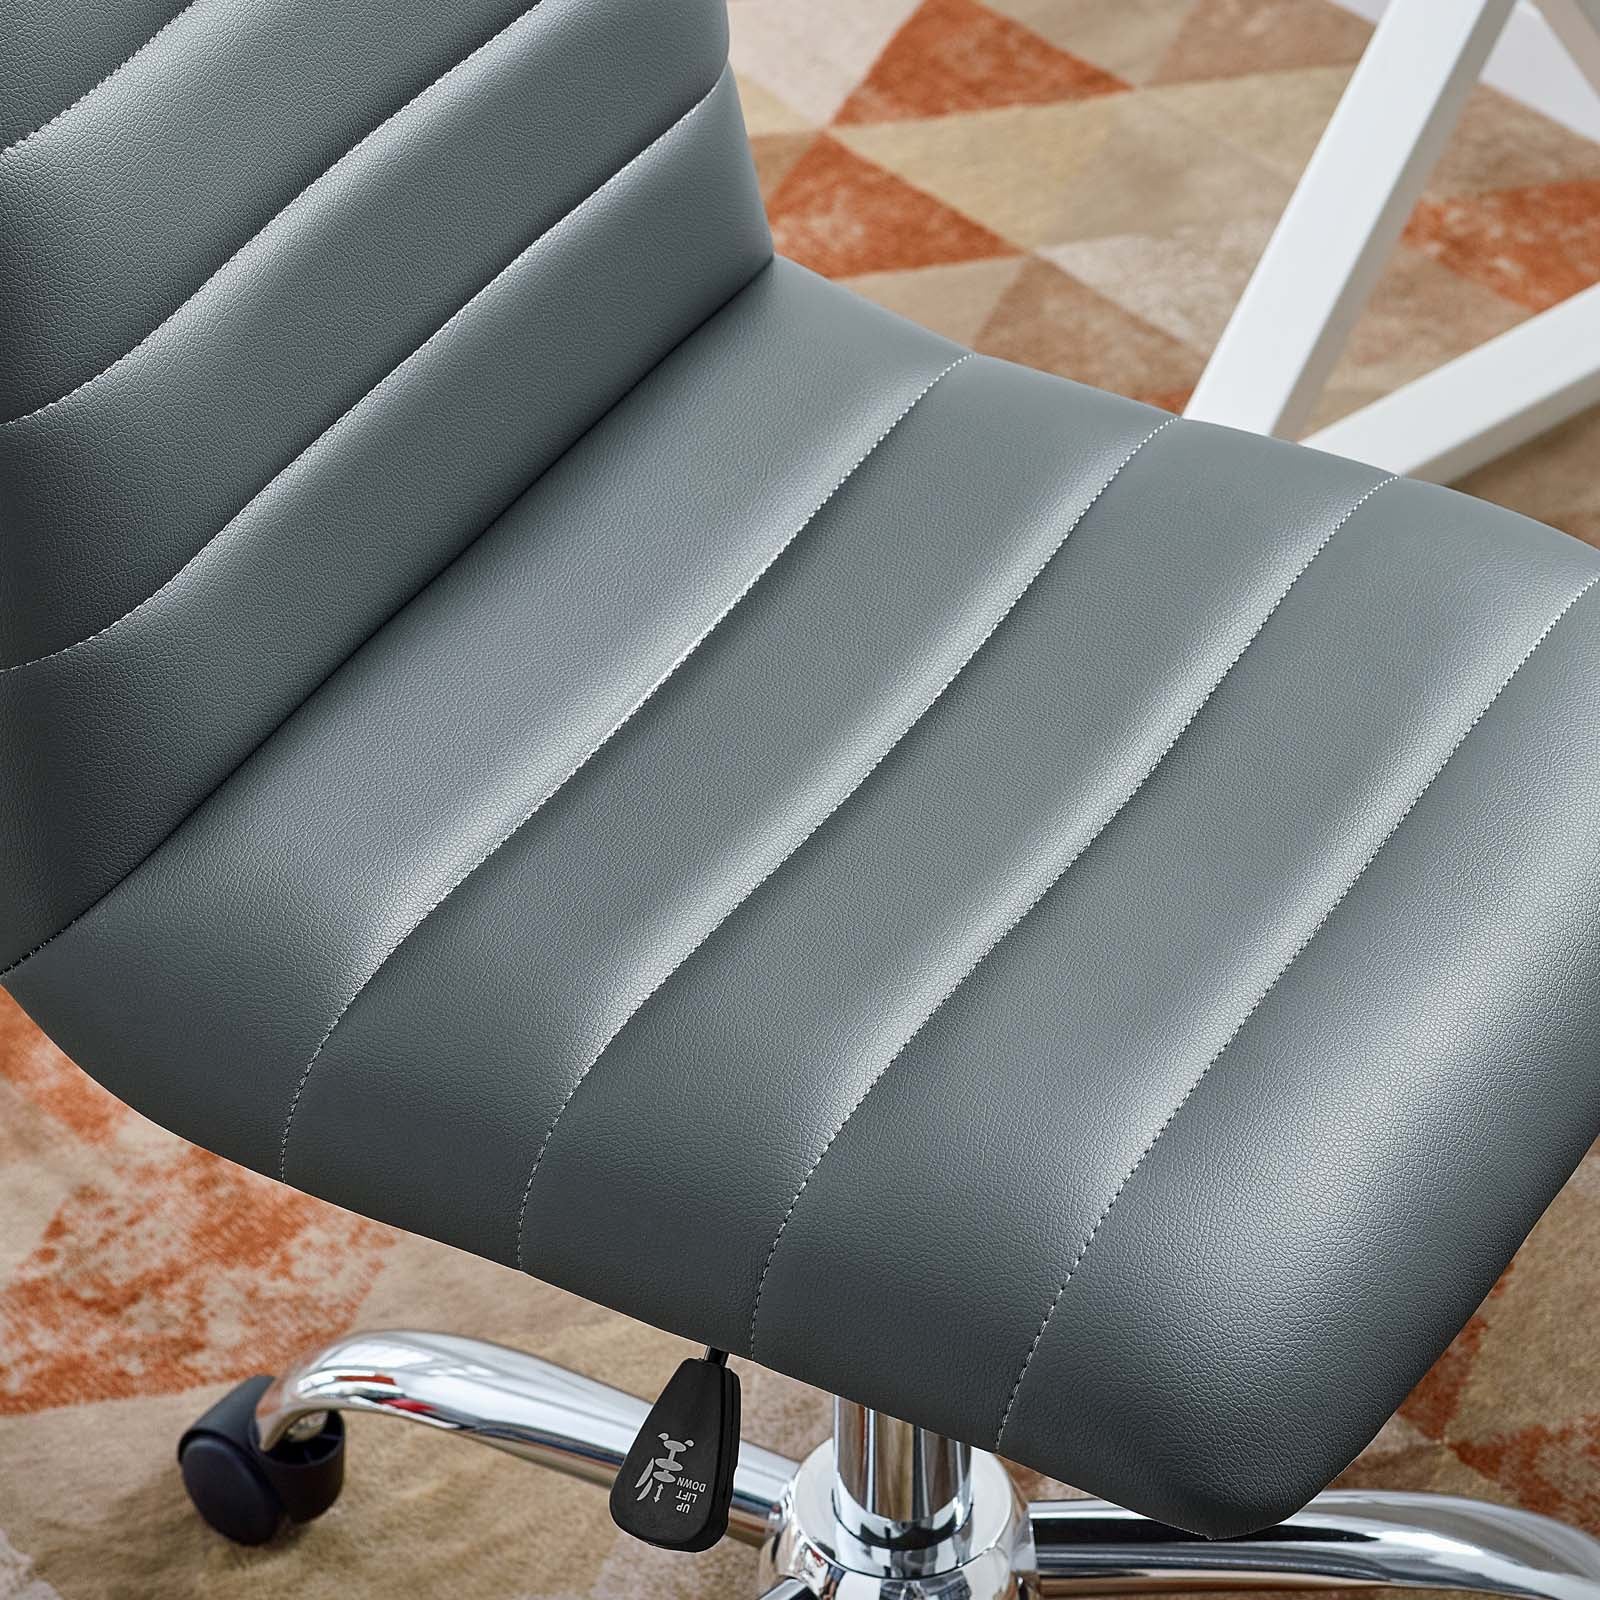 Modway Task Chairs - Ripple Armless Mid Back Vinyl Office Chair Gray